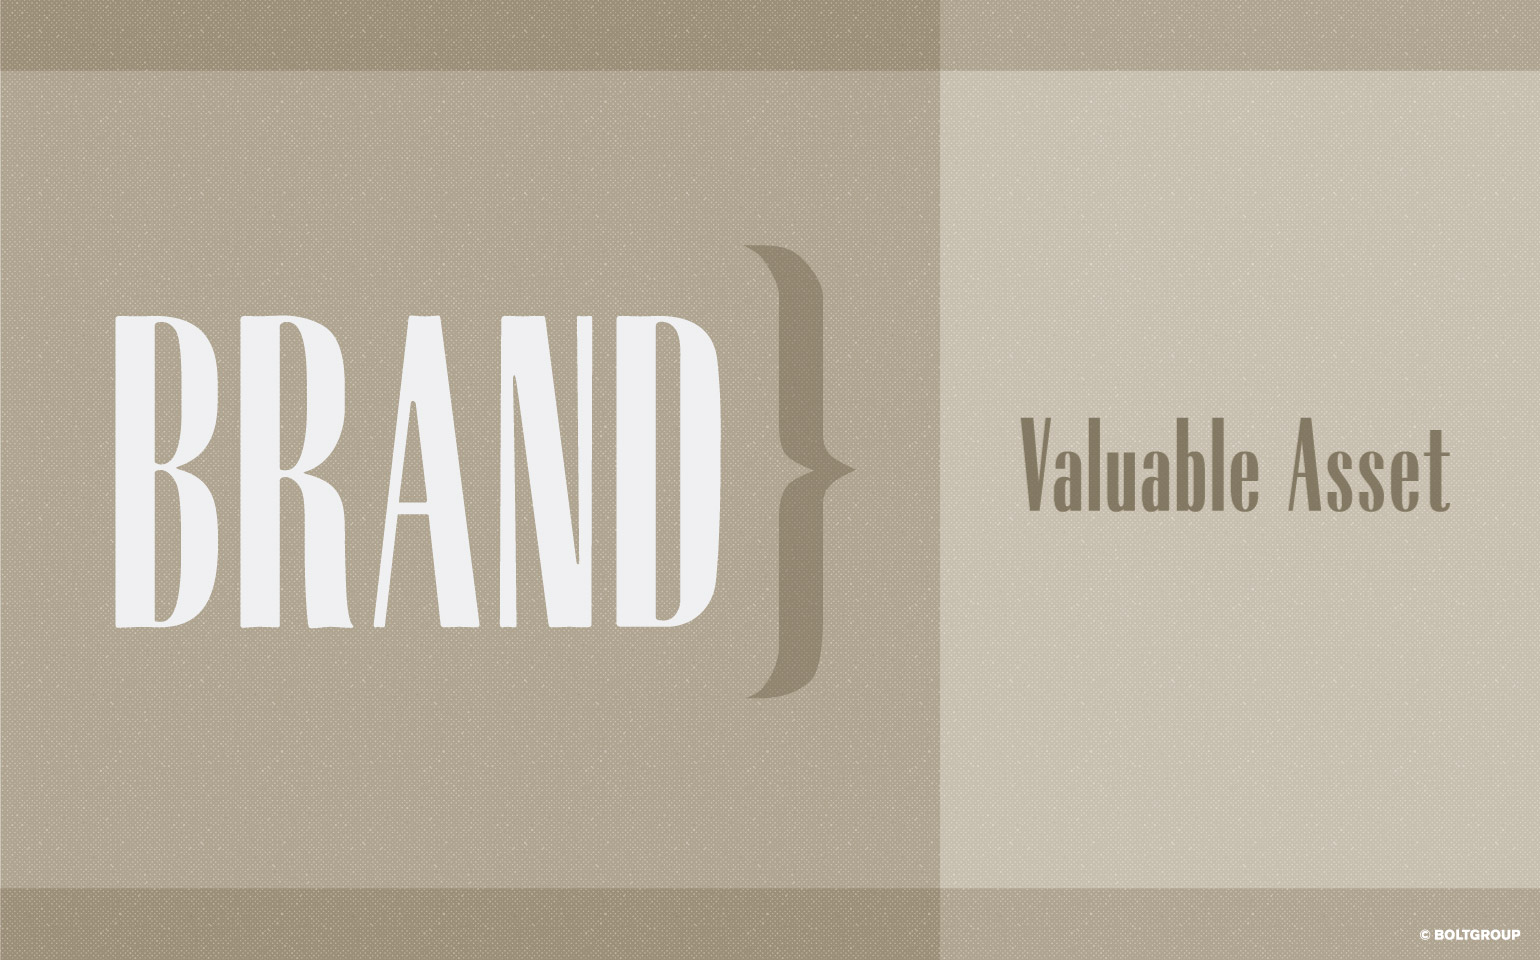 Brand is Valuable Asset